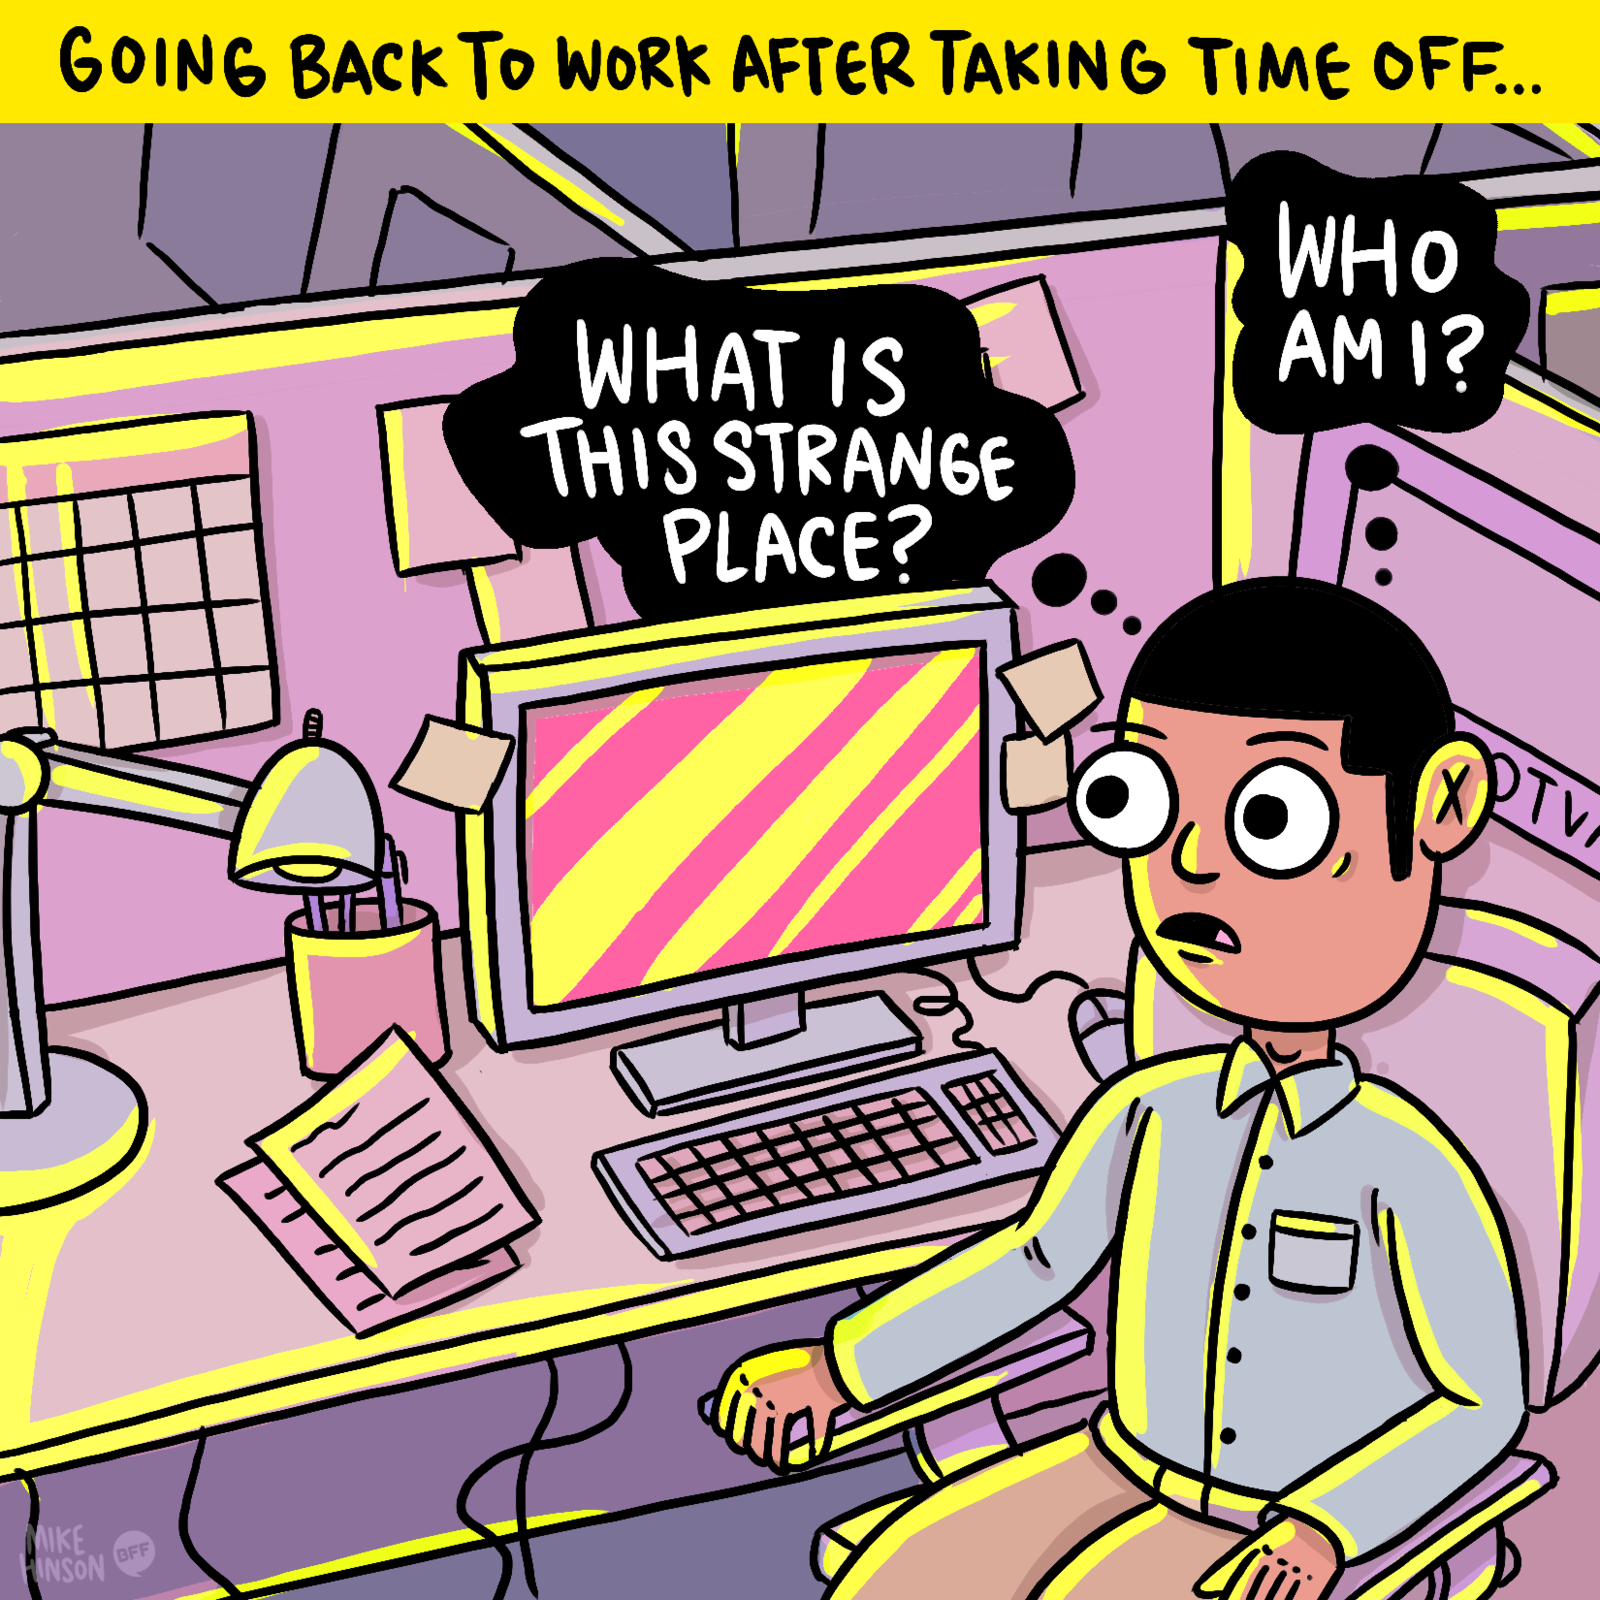 Cartoon of someone who forgot about work while on vacation